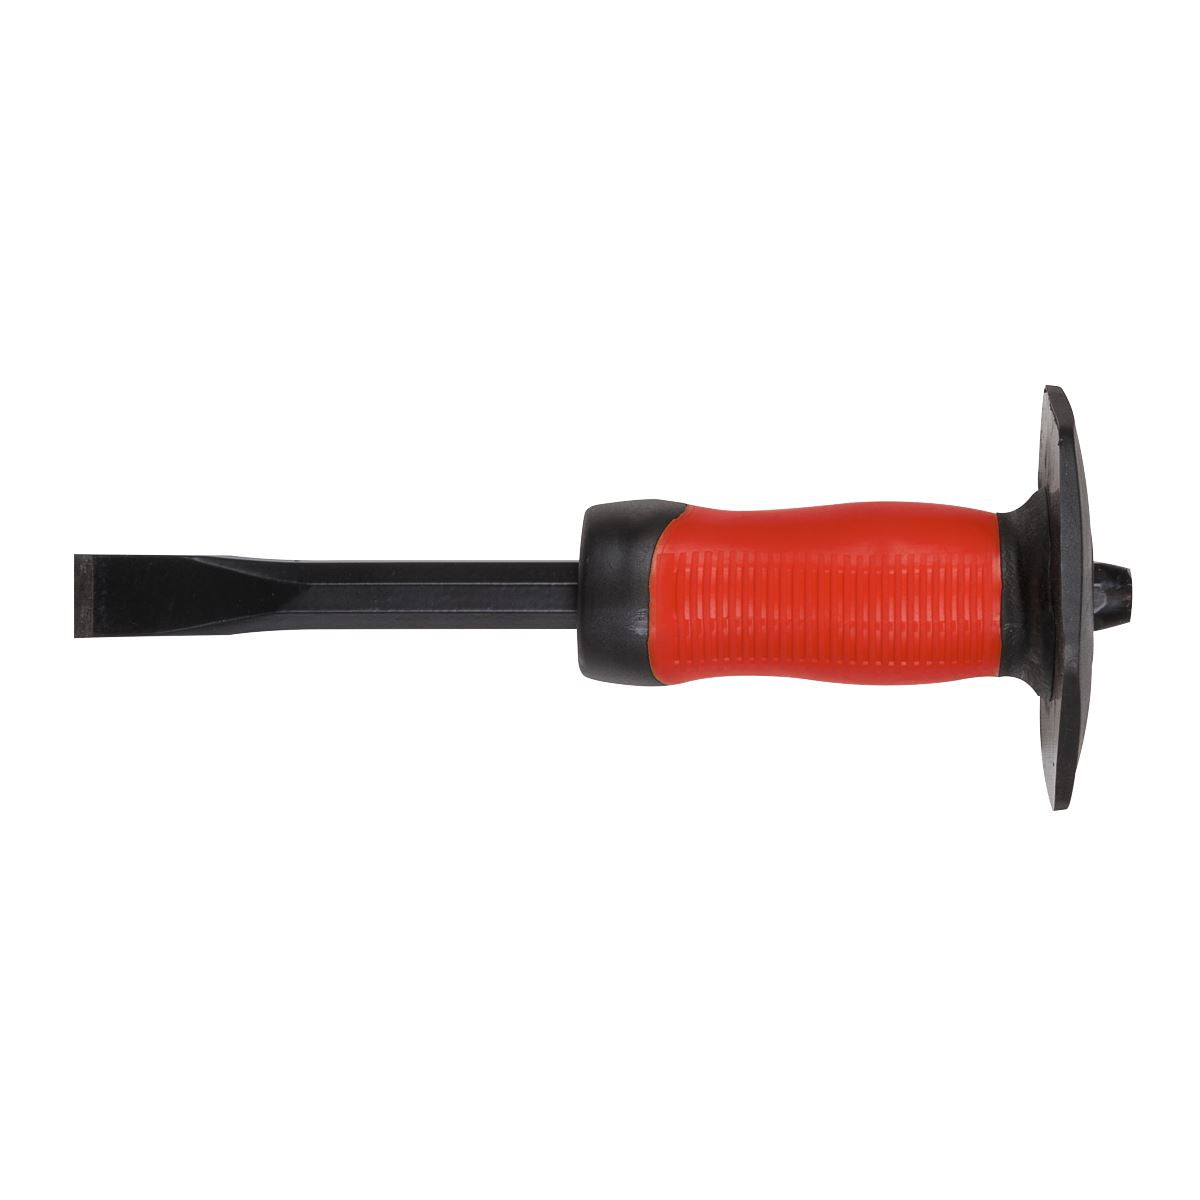 Sealey Cold Chisel With Grip 19 x 250mm